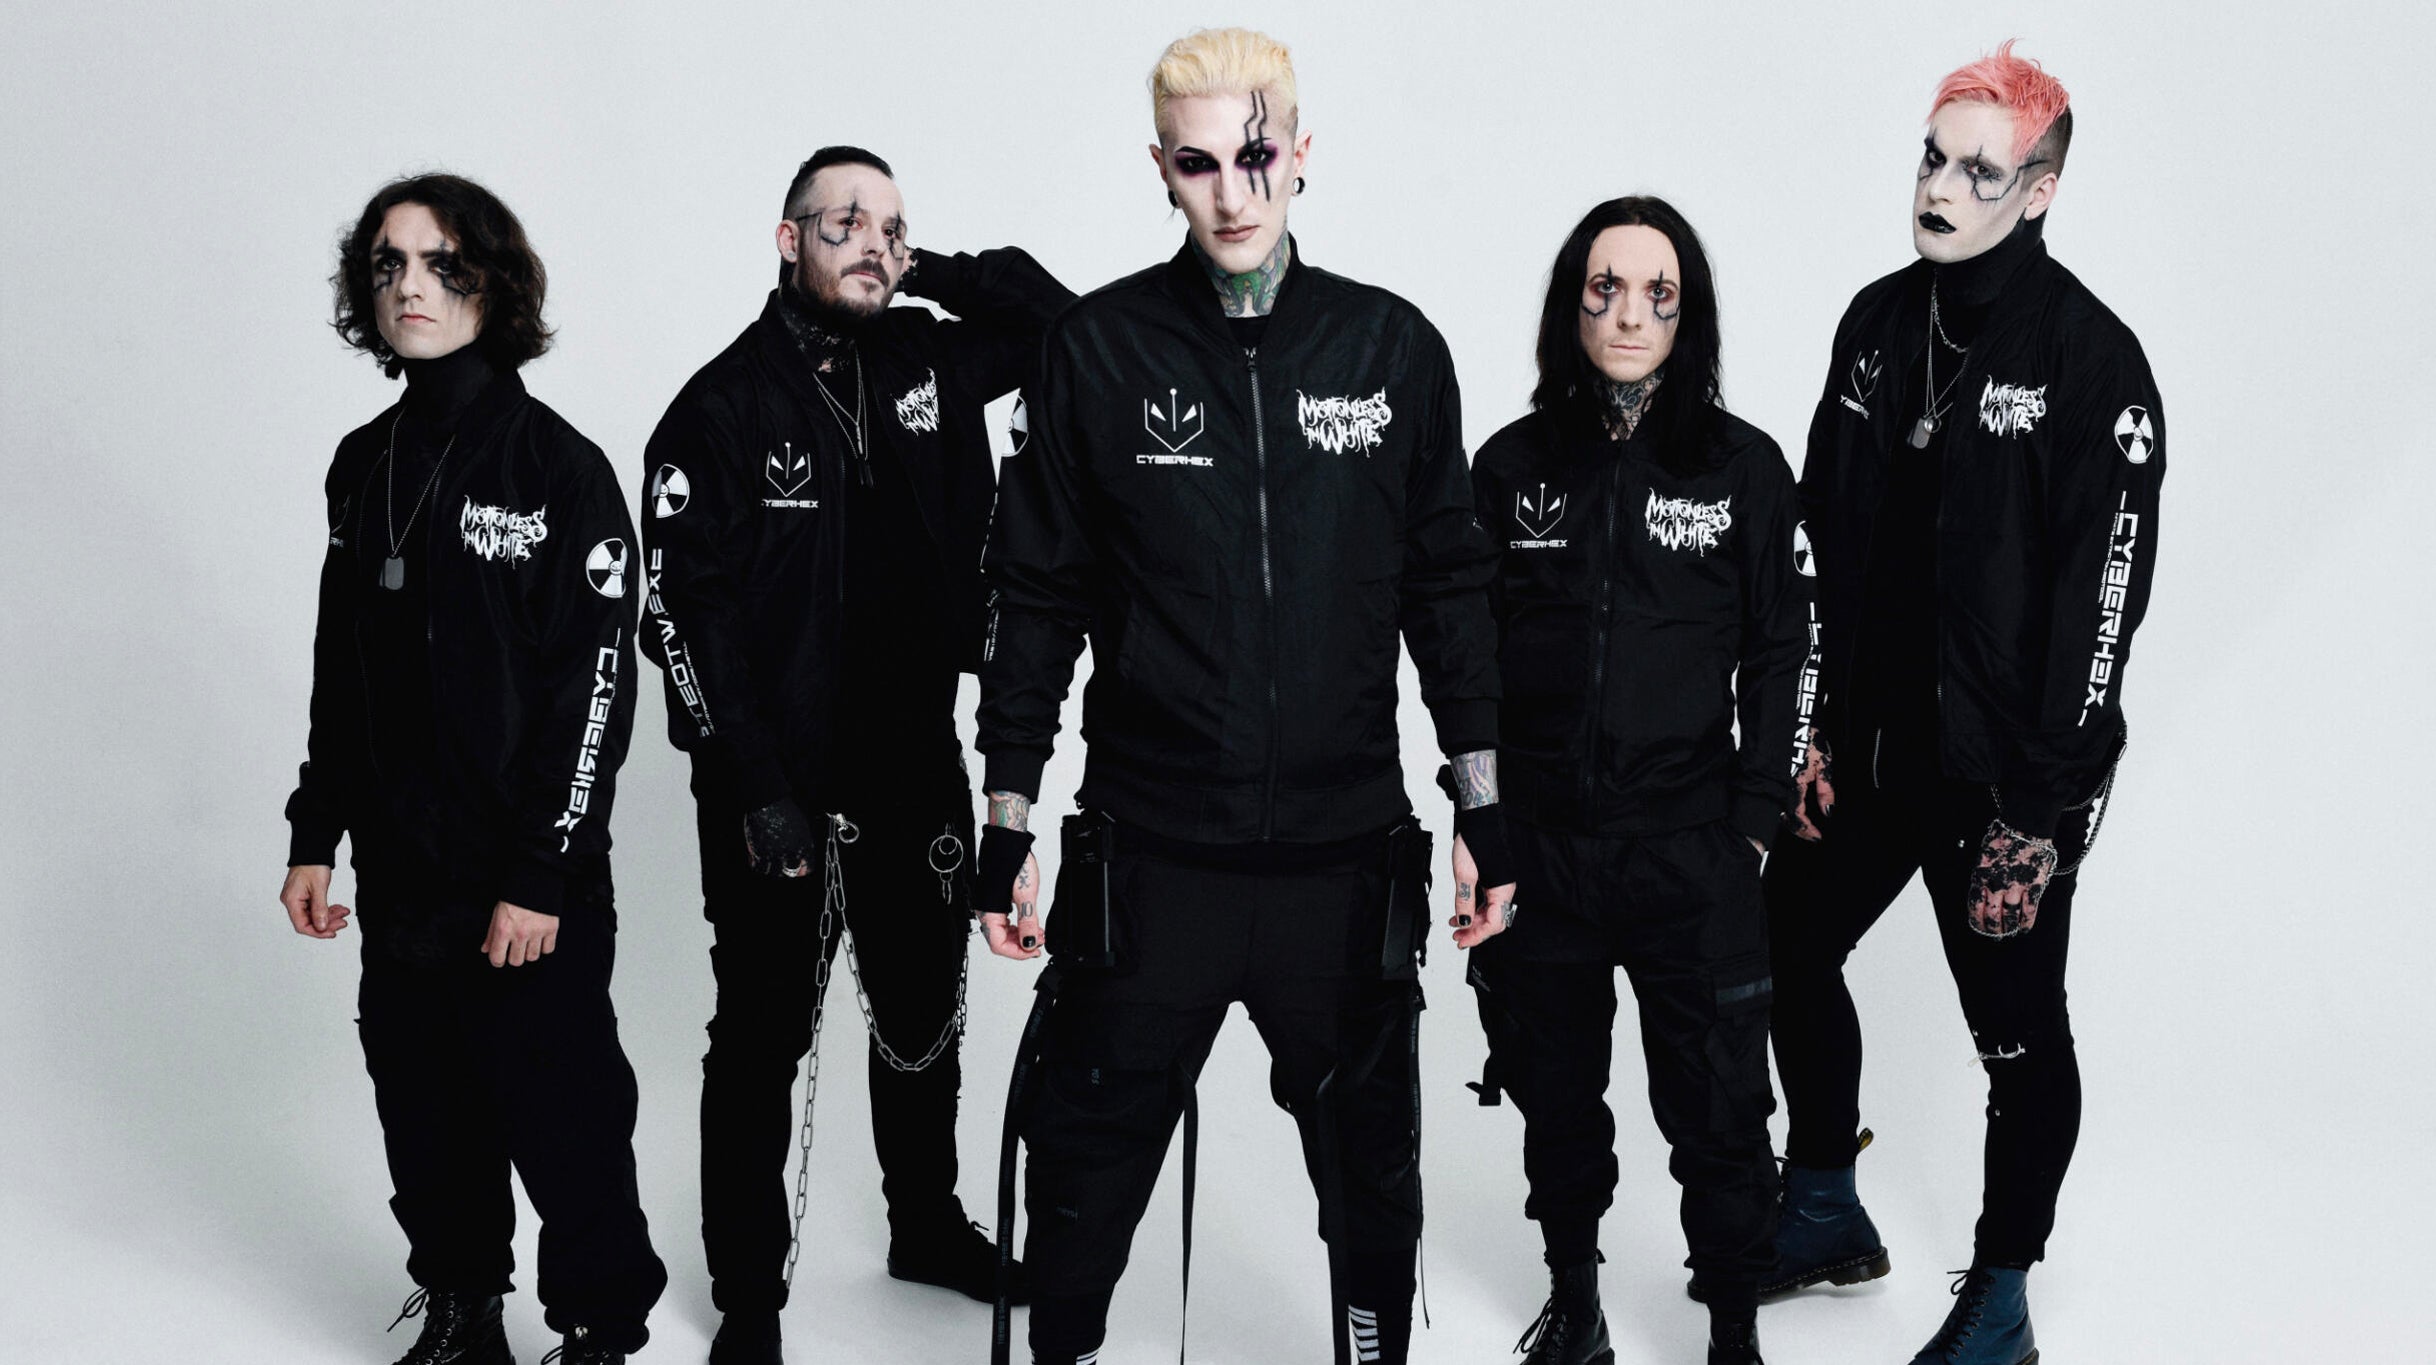 Motionless In White & In This Moment: The Dark Horizon Tour presales in Houston